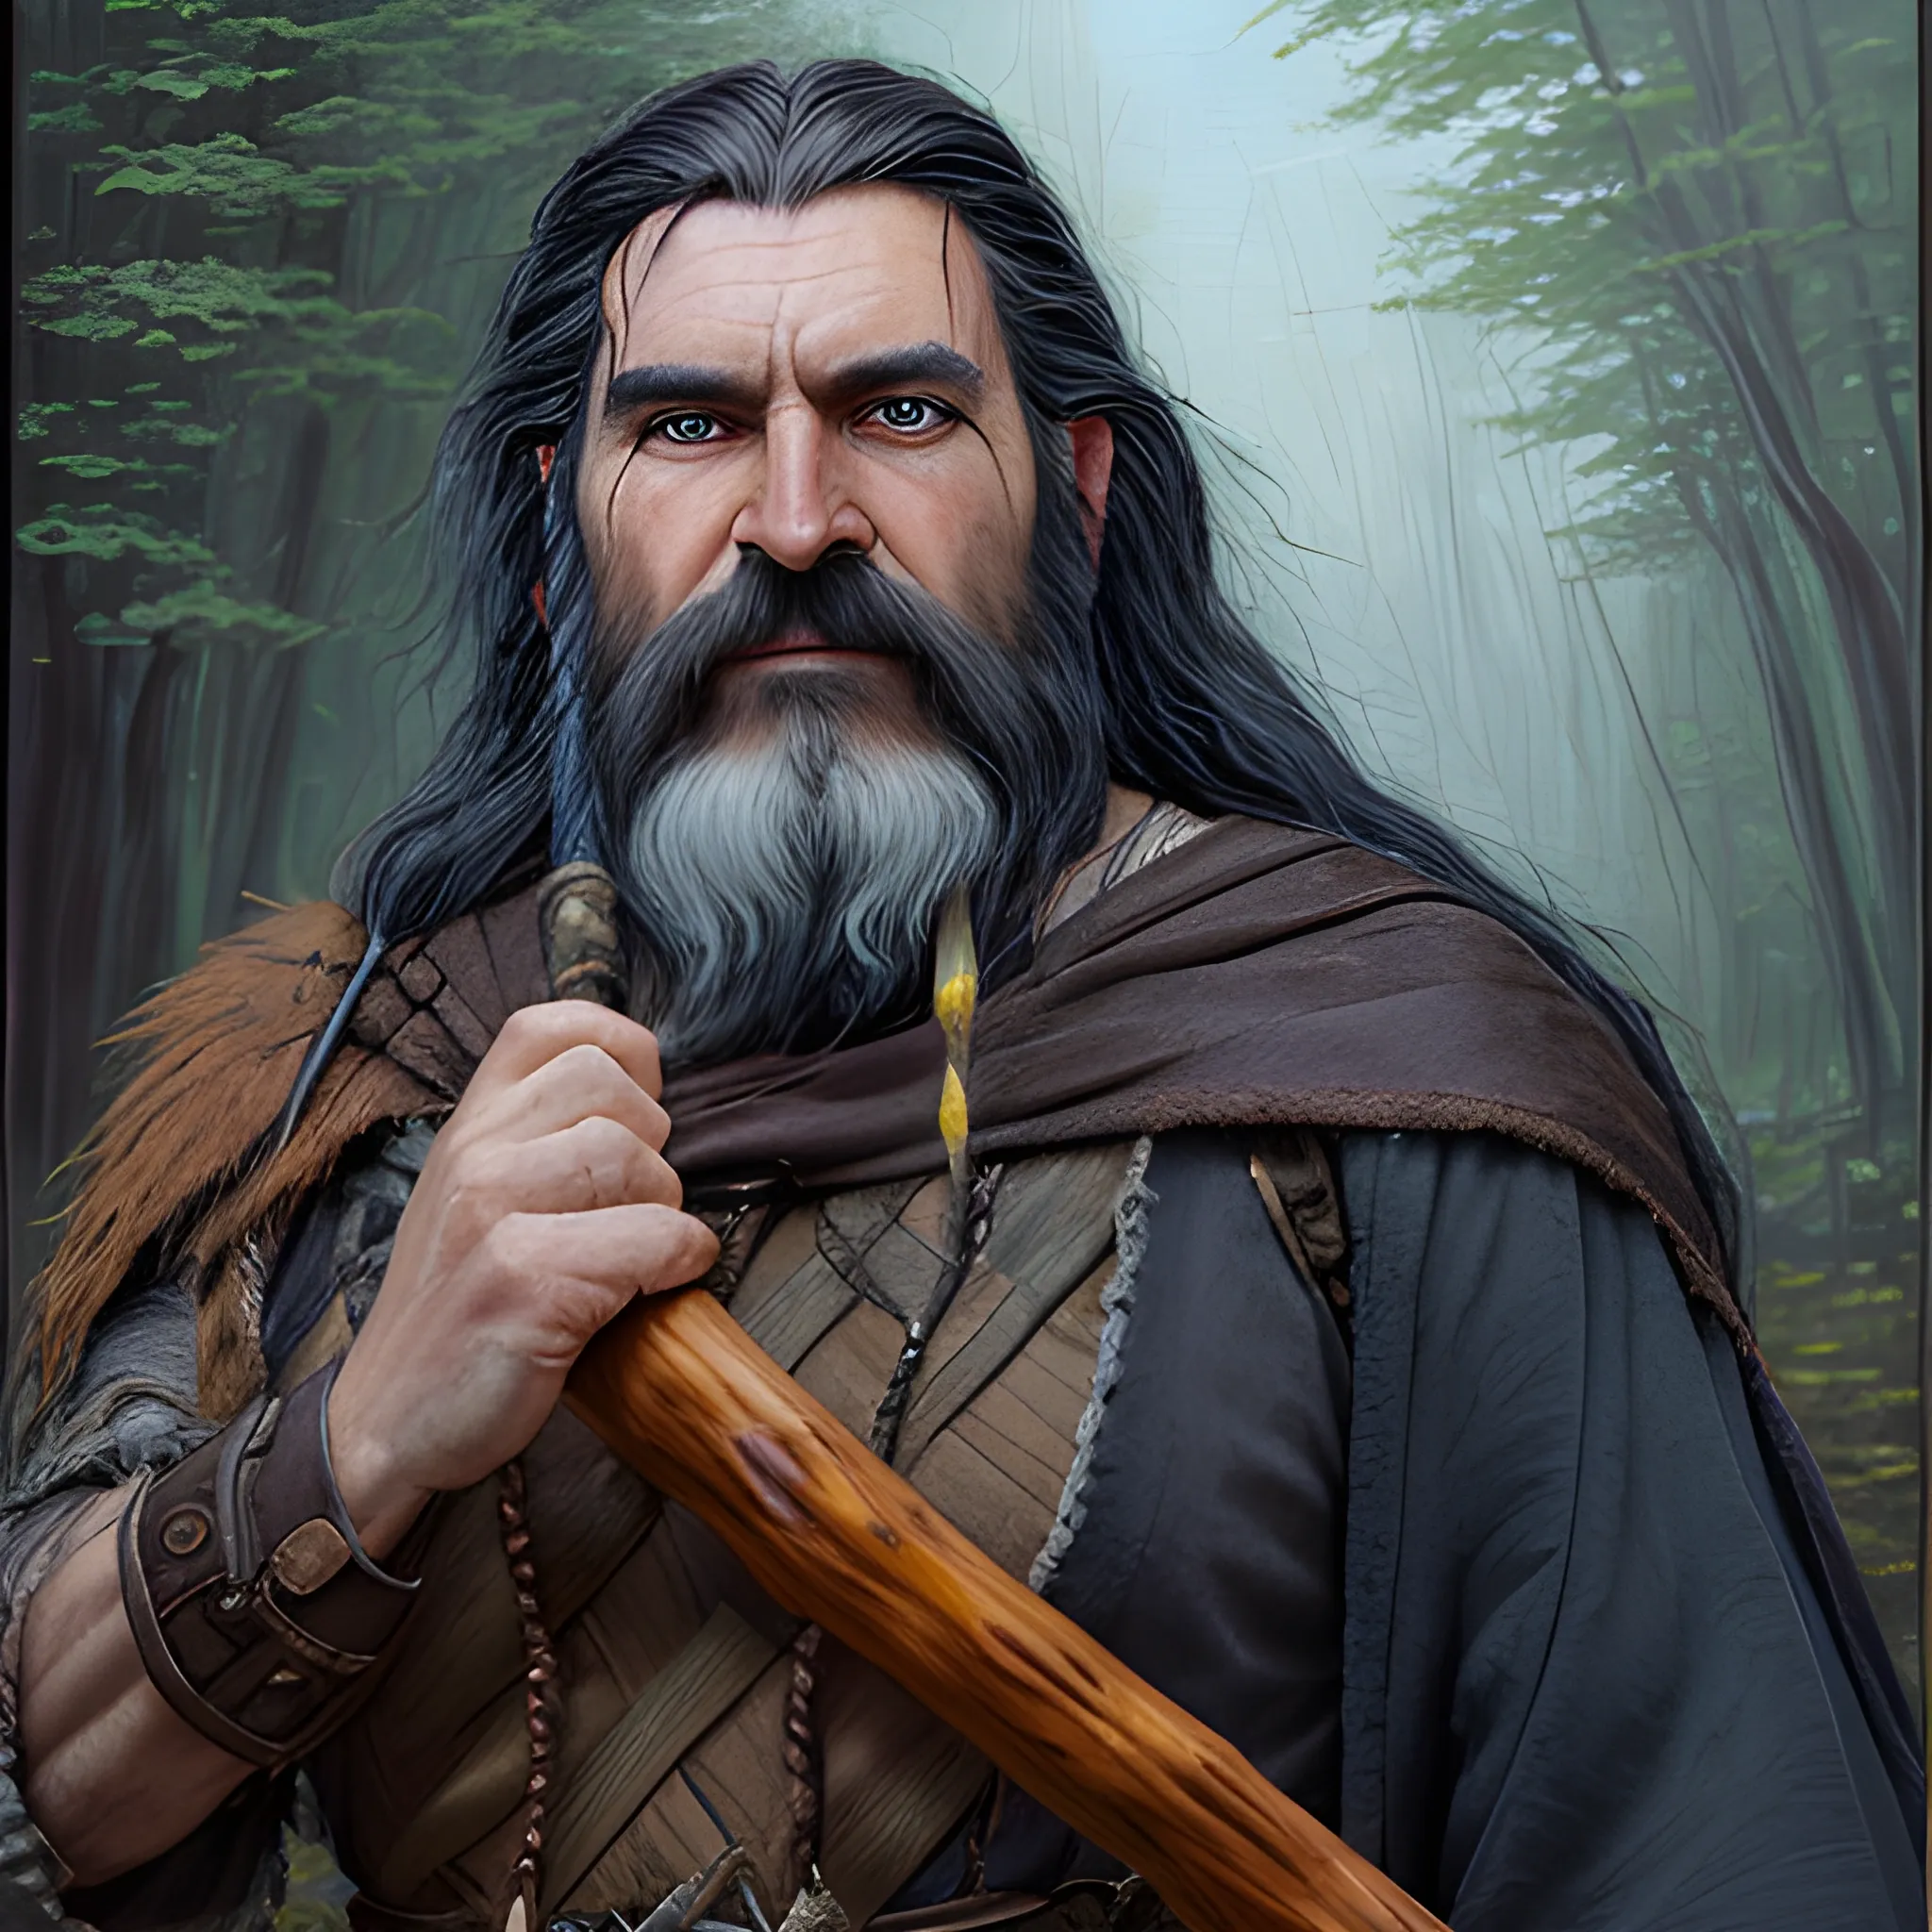 Generate a full-body portrait of a fantasy human druid inspired by the styles of Tolkien and Warcraft. Envision the character in worn, simple leather garb with a walking stick. Emphasize the man's rugged but handsome facial features with short dark black hair and a long, black beard. The man should have ice-blue eyes and a smiling expression that hides a deep-seated pain, Oil Painting